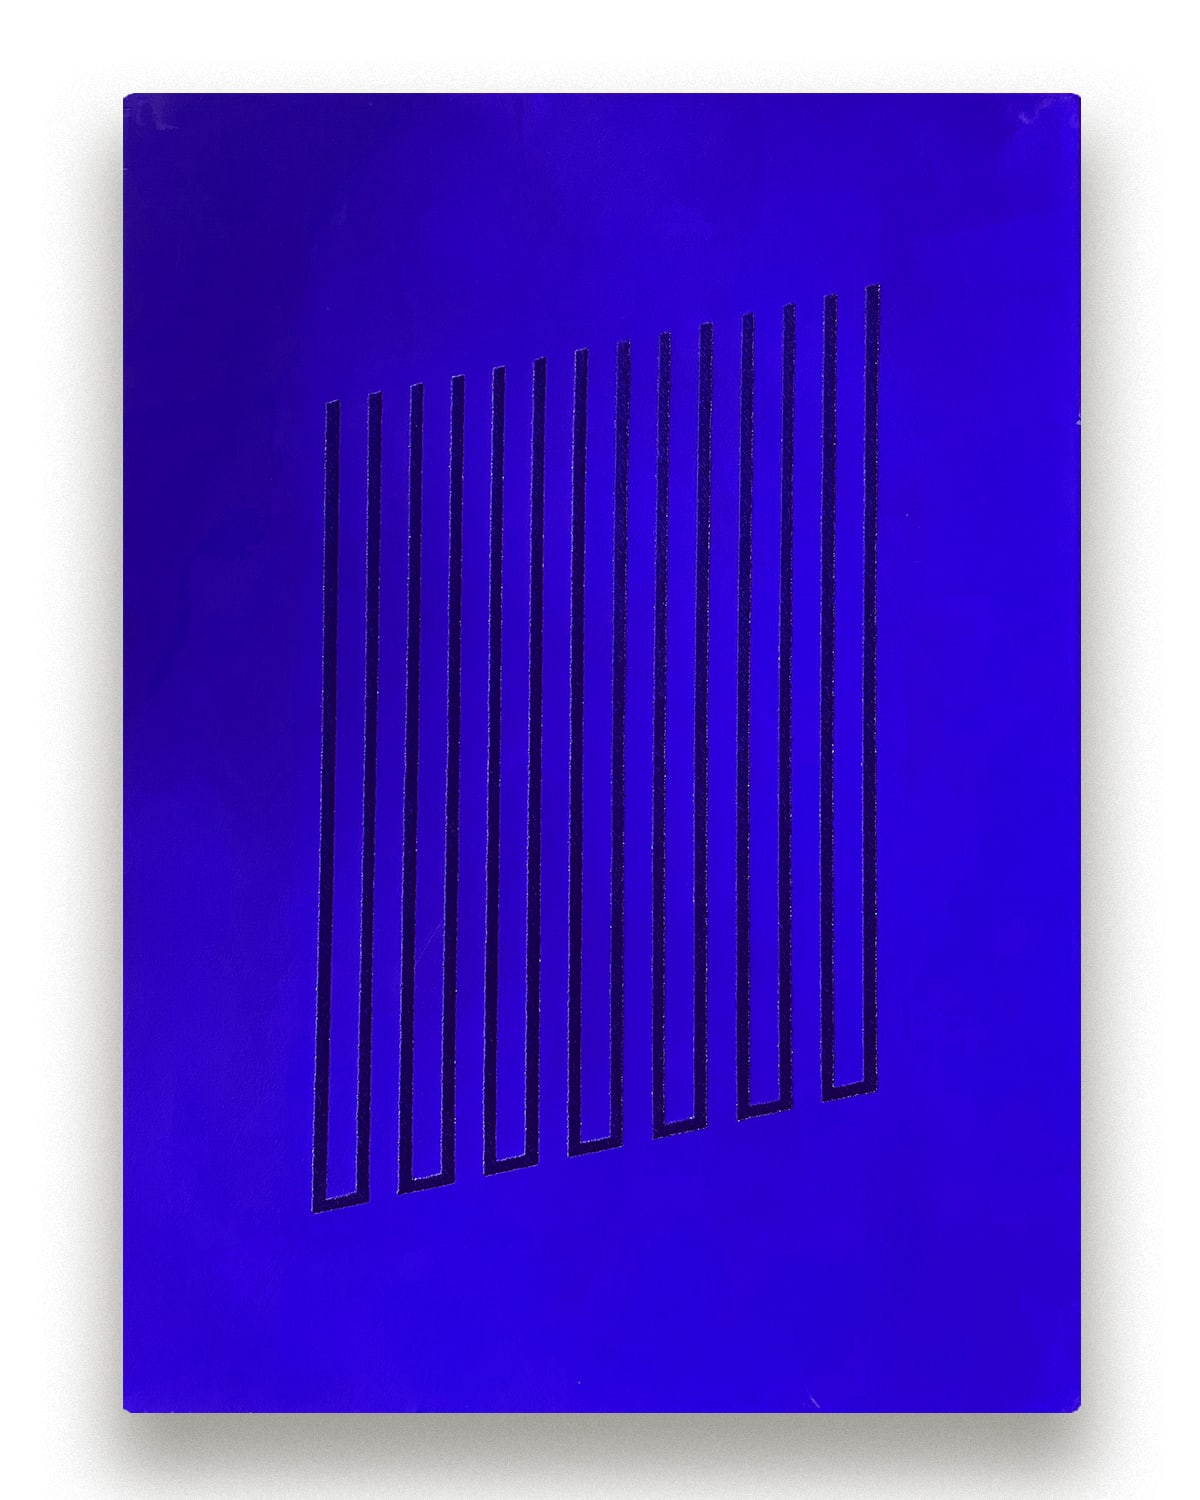 Embroidery (Judd), Blue, Number 6, 2019-2020